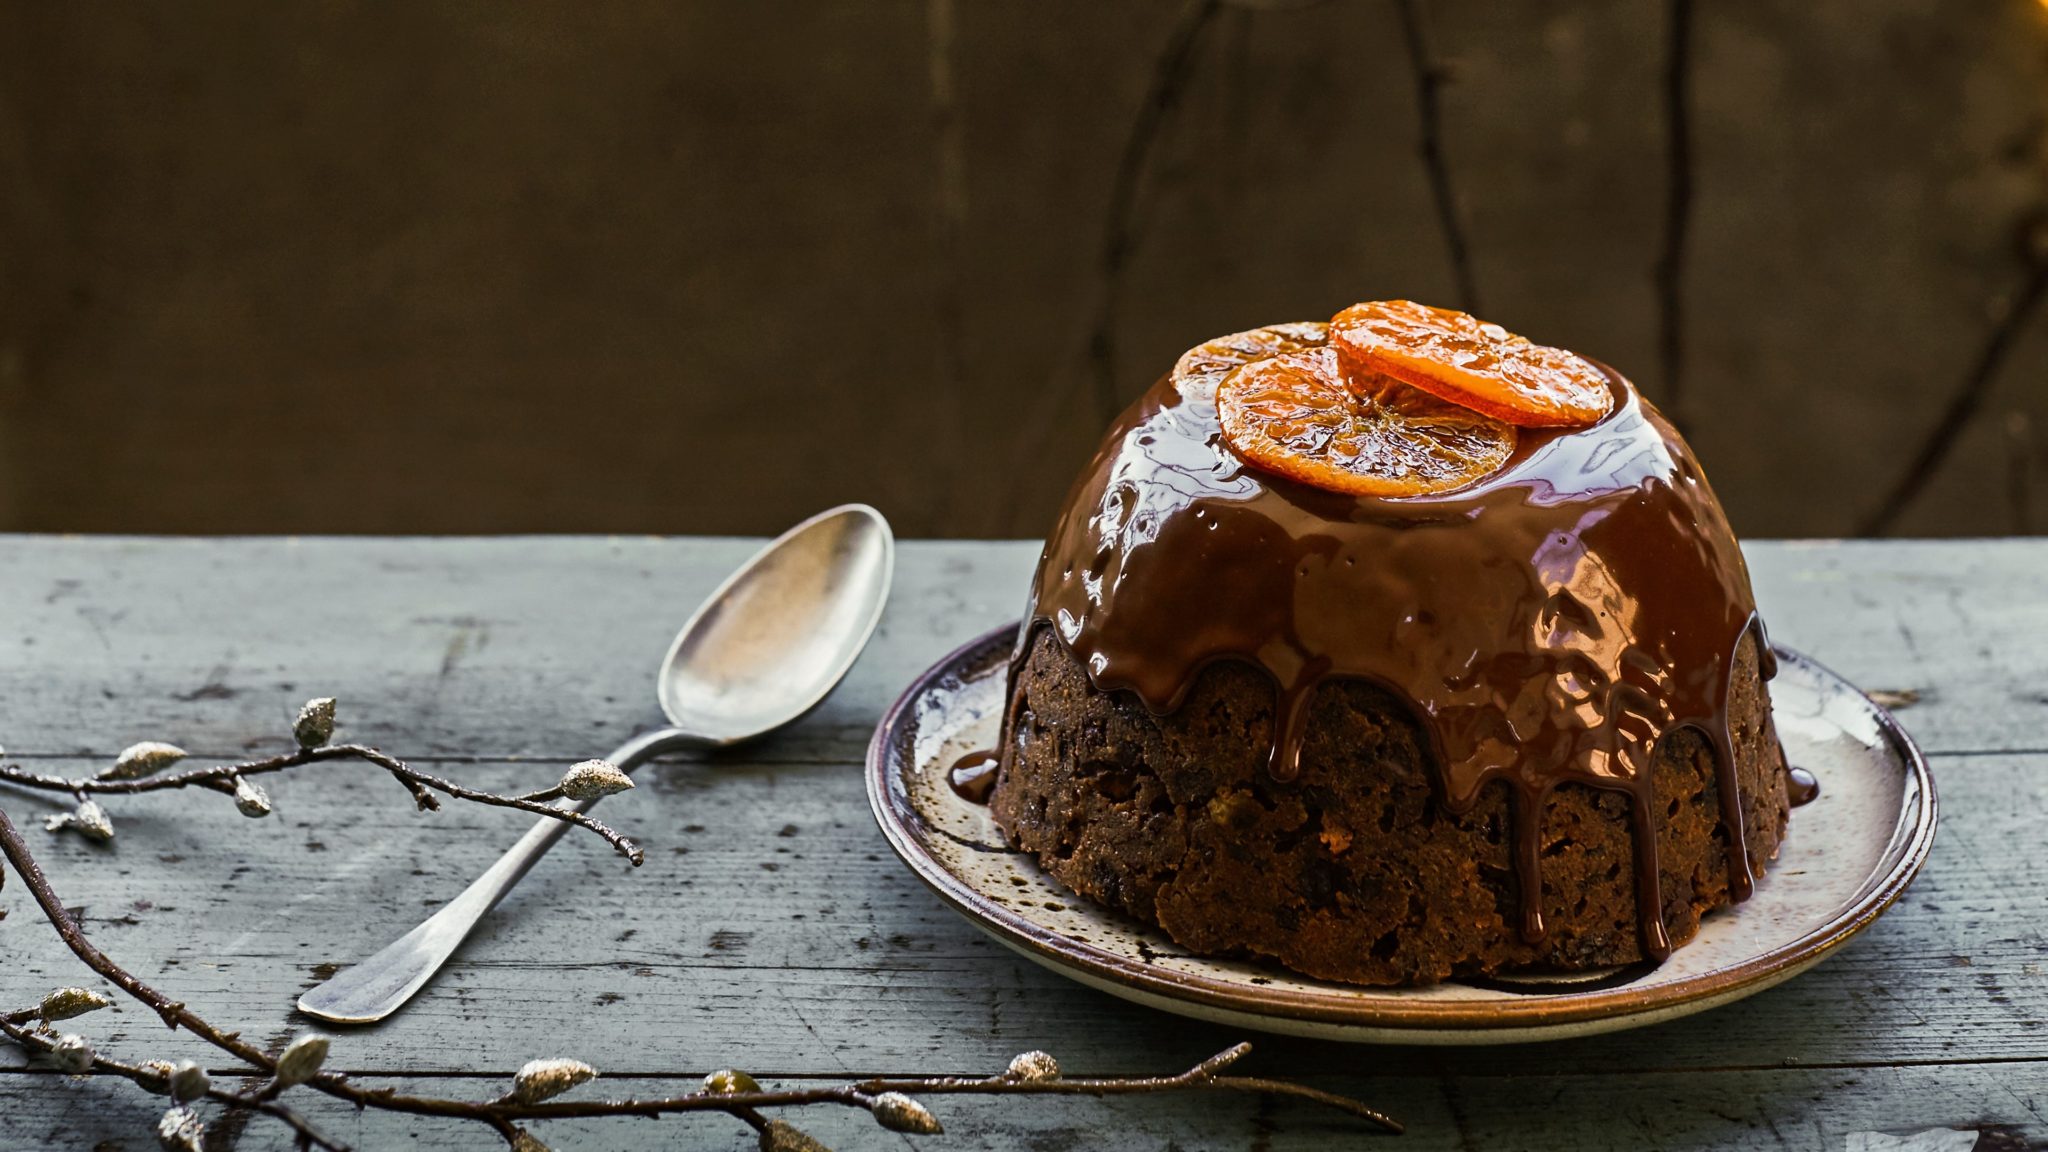 You are currently viewing Edd Kimber’s clementine and chocolate Christmas pudding recipe